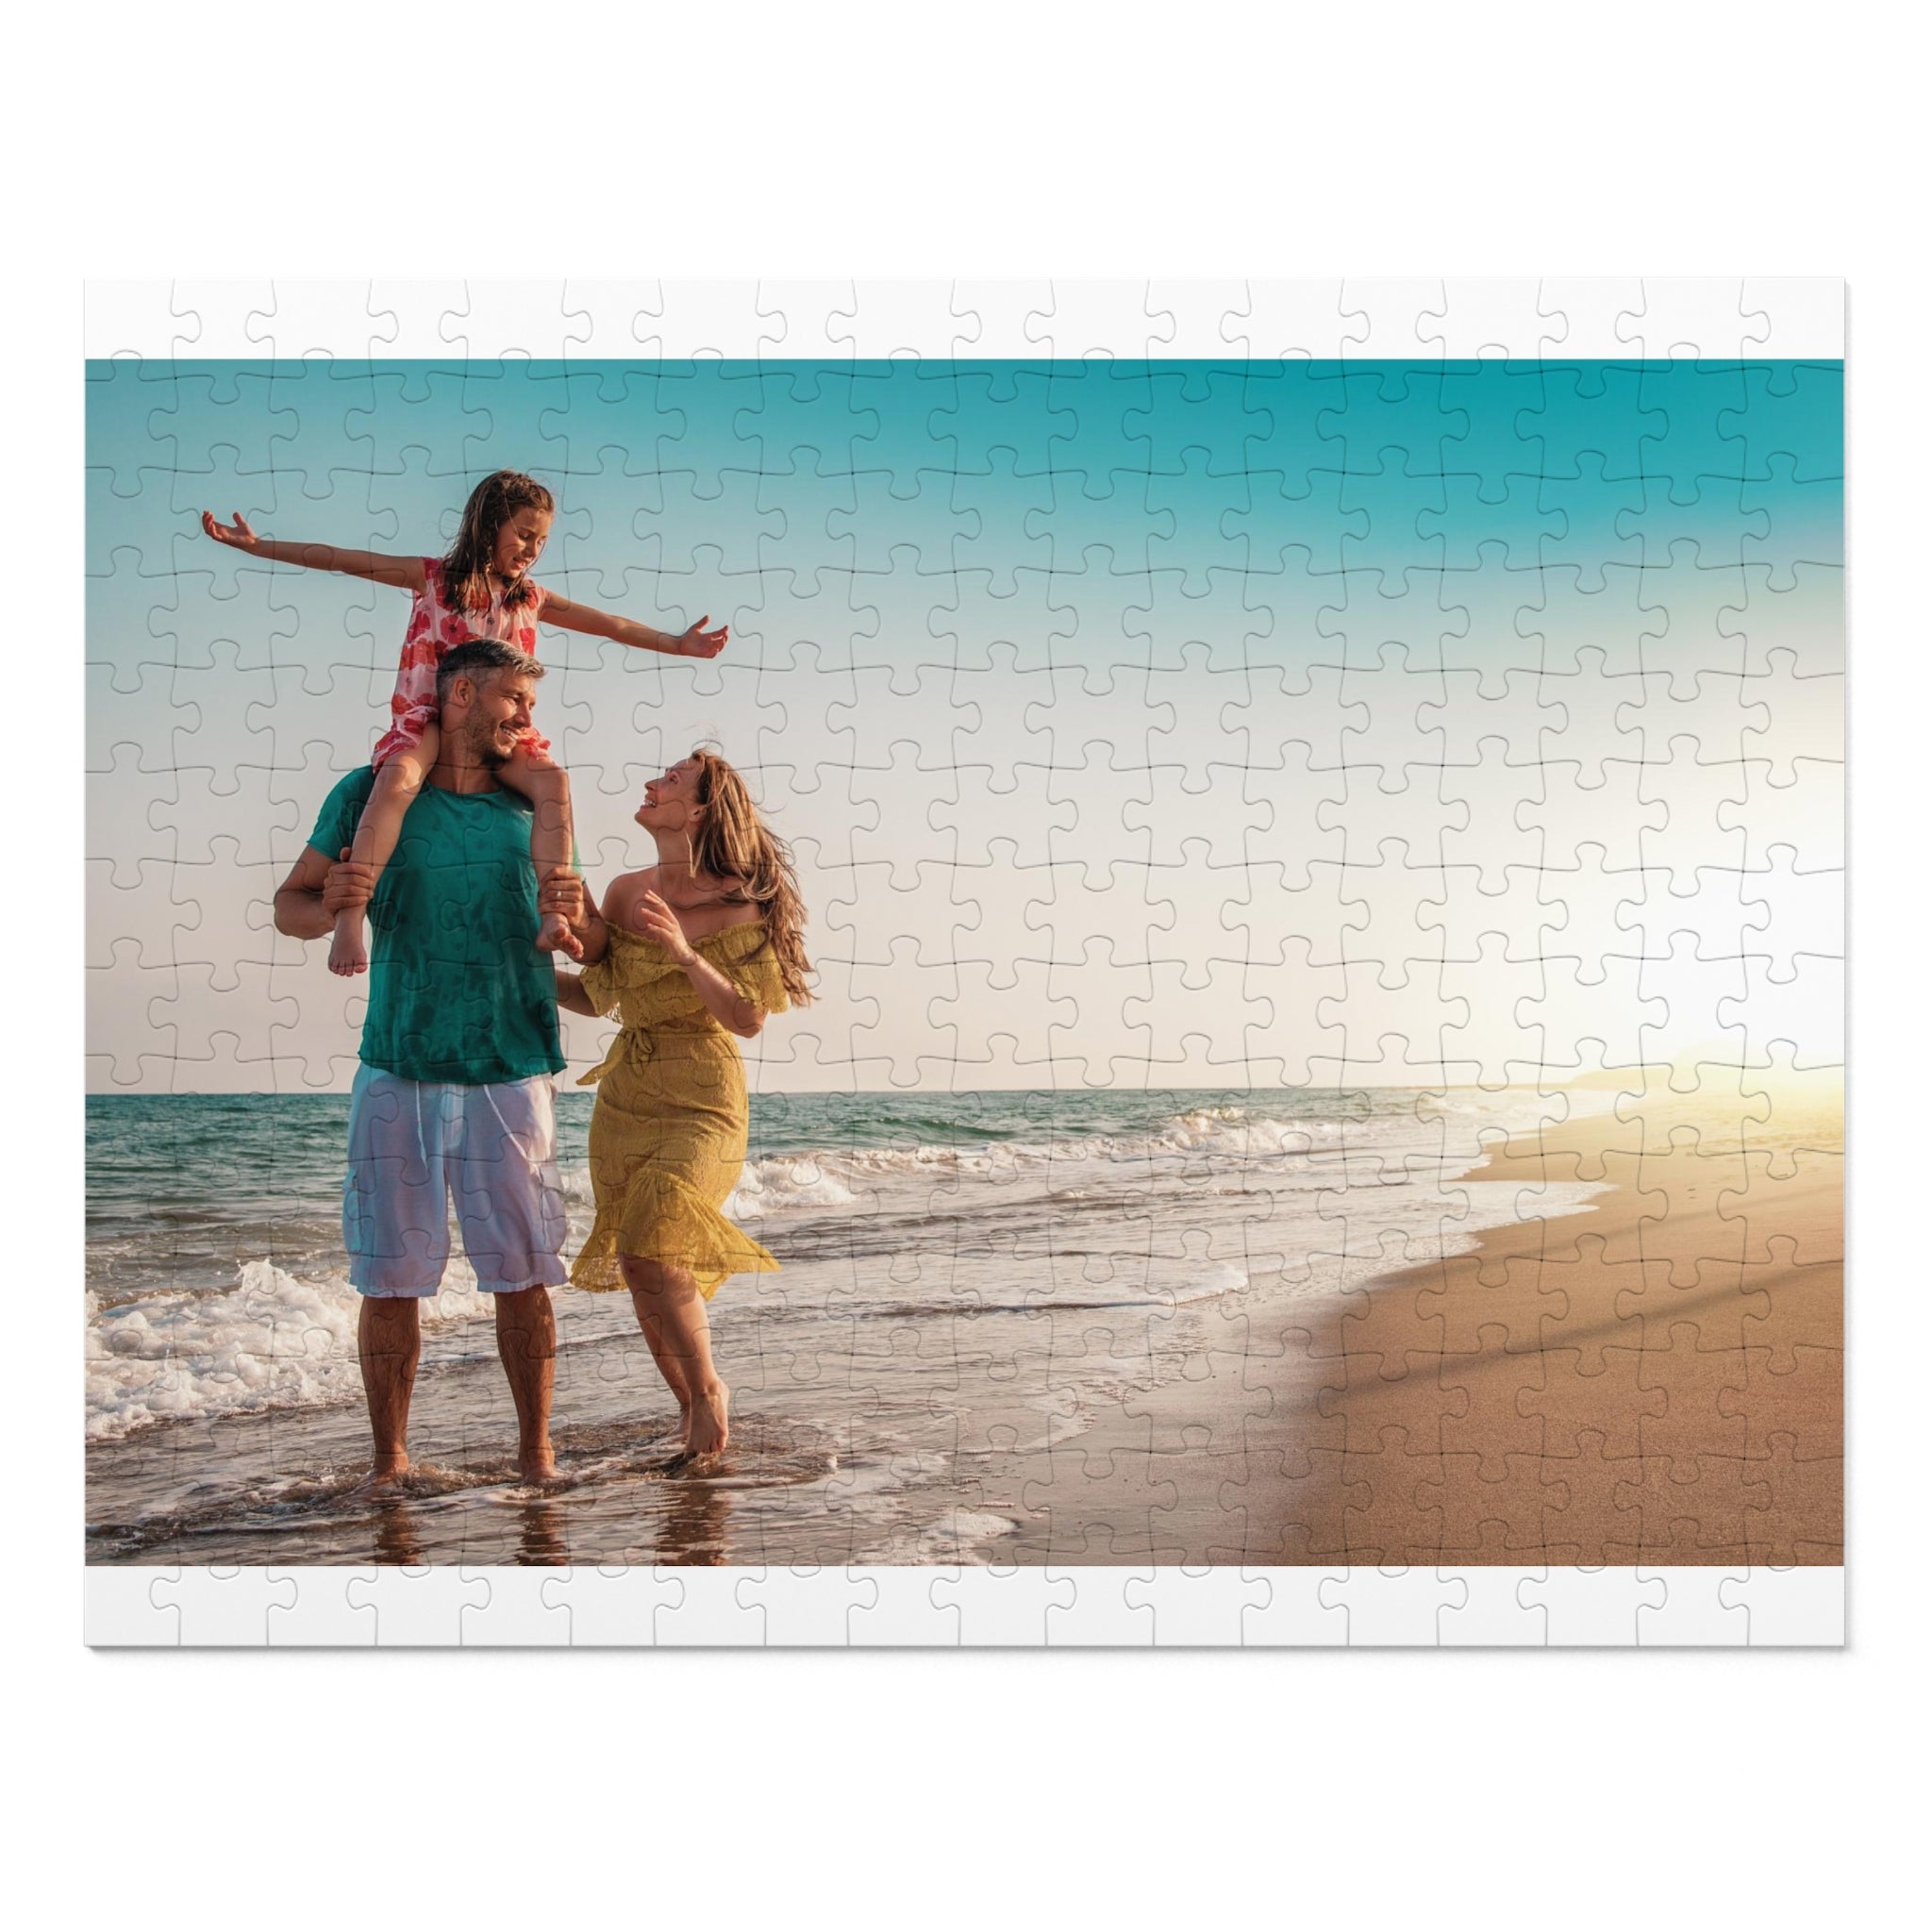 Jigsaw Puzzle, Personalized Gift, Puzzle from Your Photo, Custom Photo Puzzle, Personalized Puzzle, Wedding/Couple Gifts, Gift For Kids